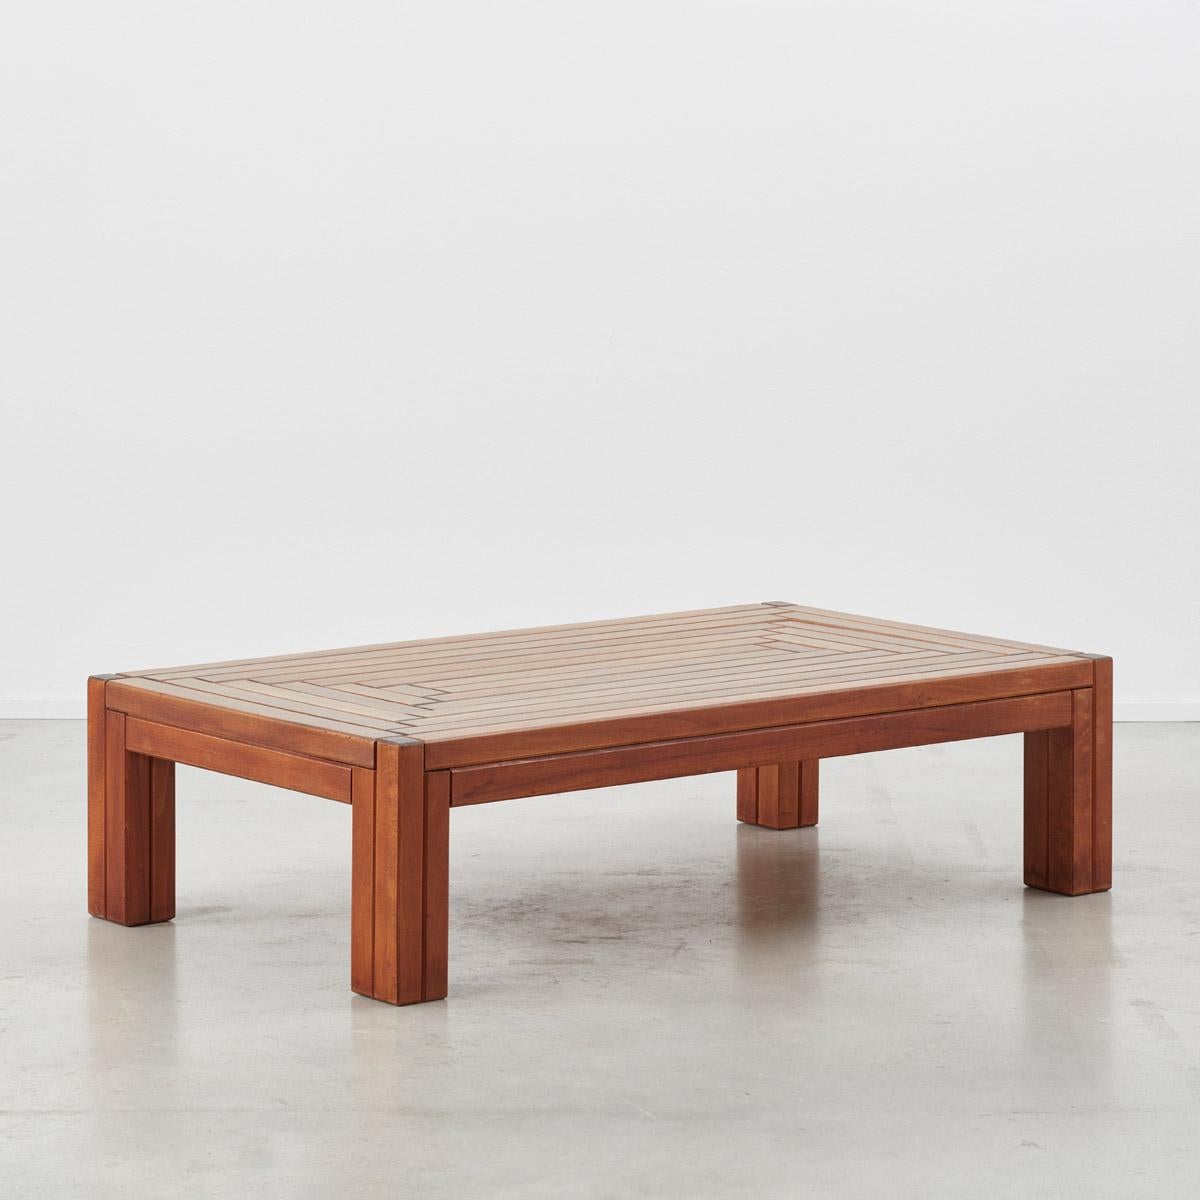 This solid wood coffee table, possibly made of elm, was designed and crafted by multidisciplinary artist and designer Urano Palma. A figure of the Avant Garde, Palma was perhaps best known for his intricate handmade pieces in wood, such as this